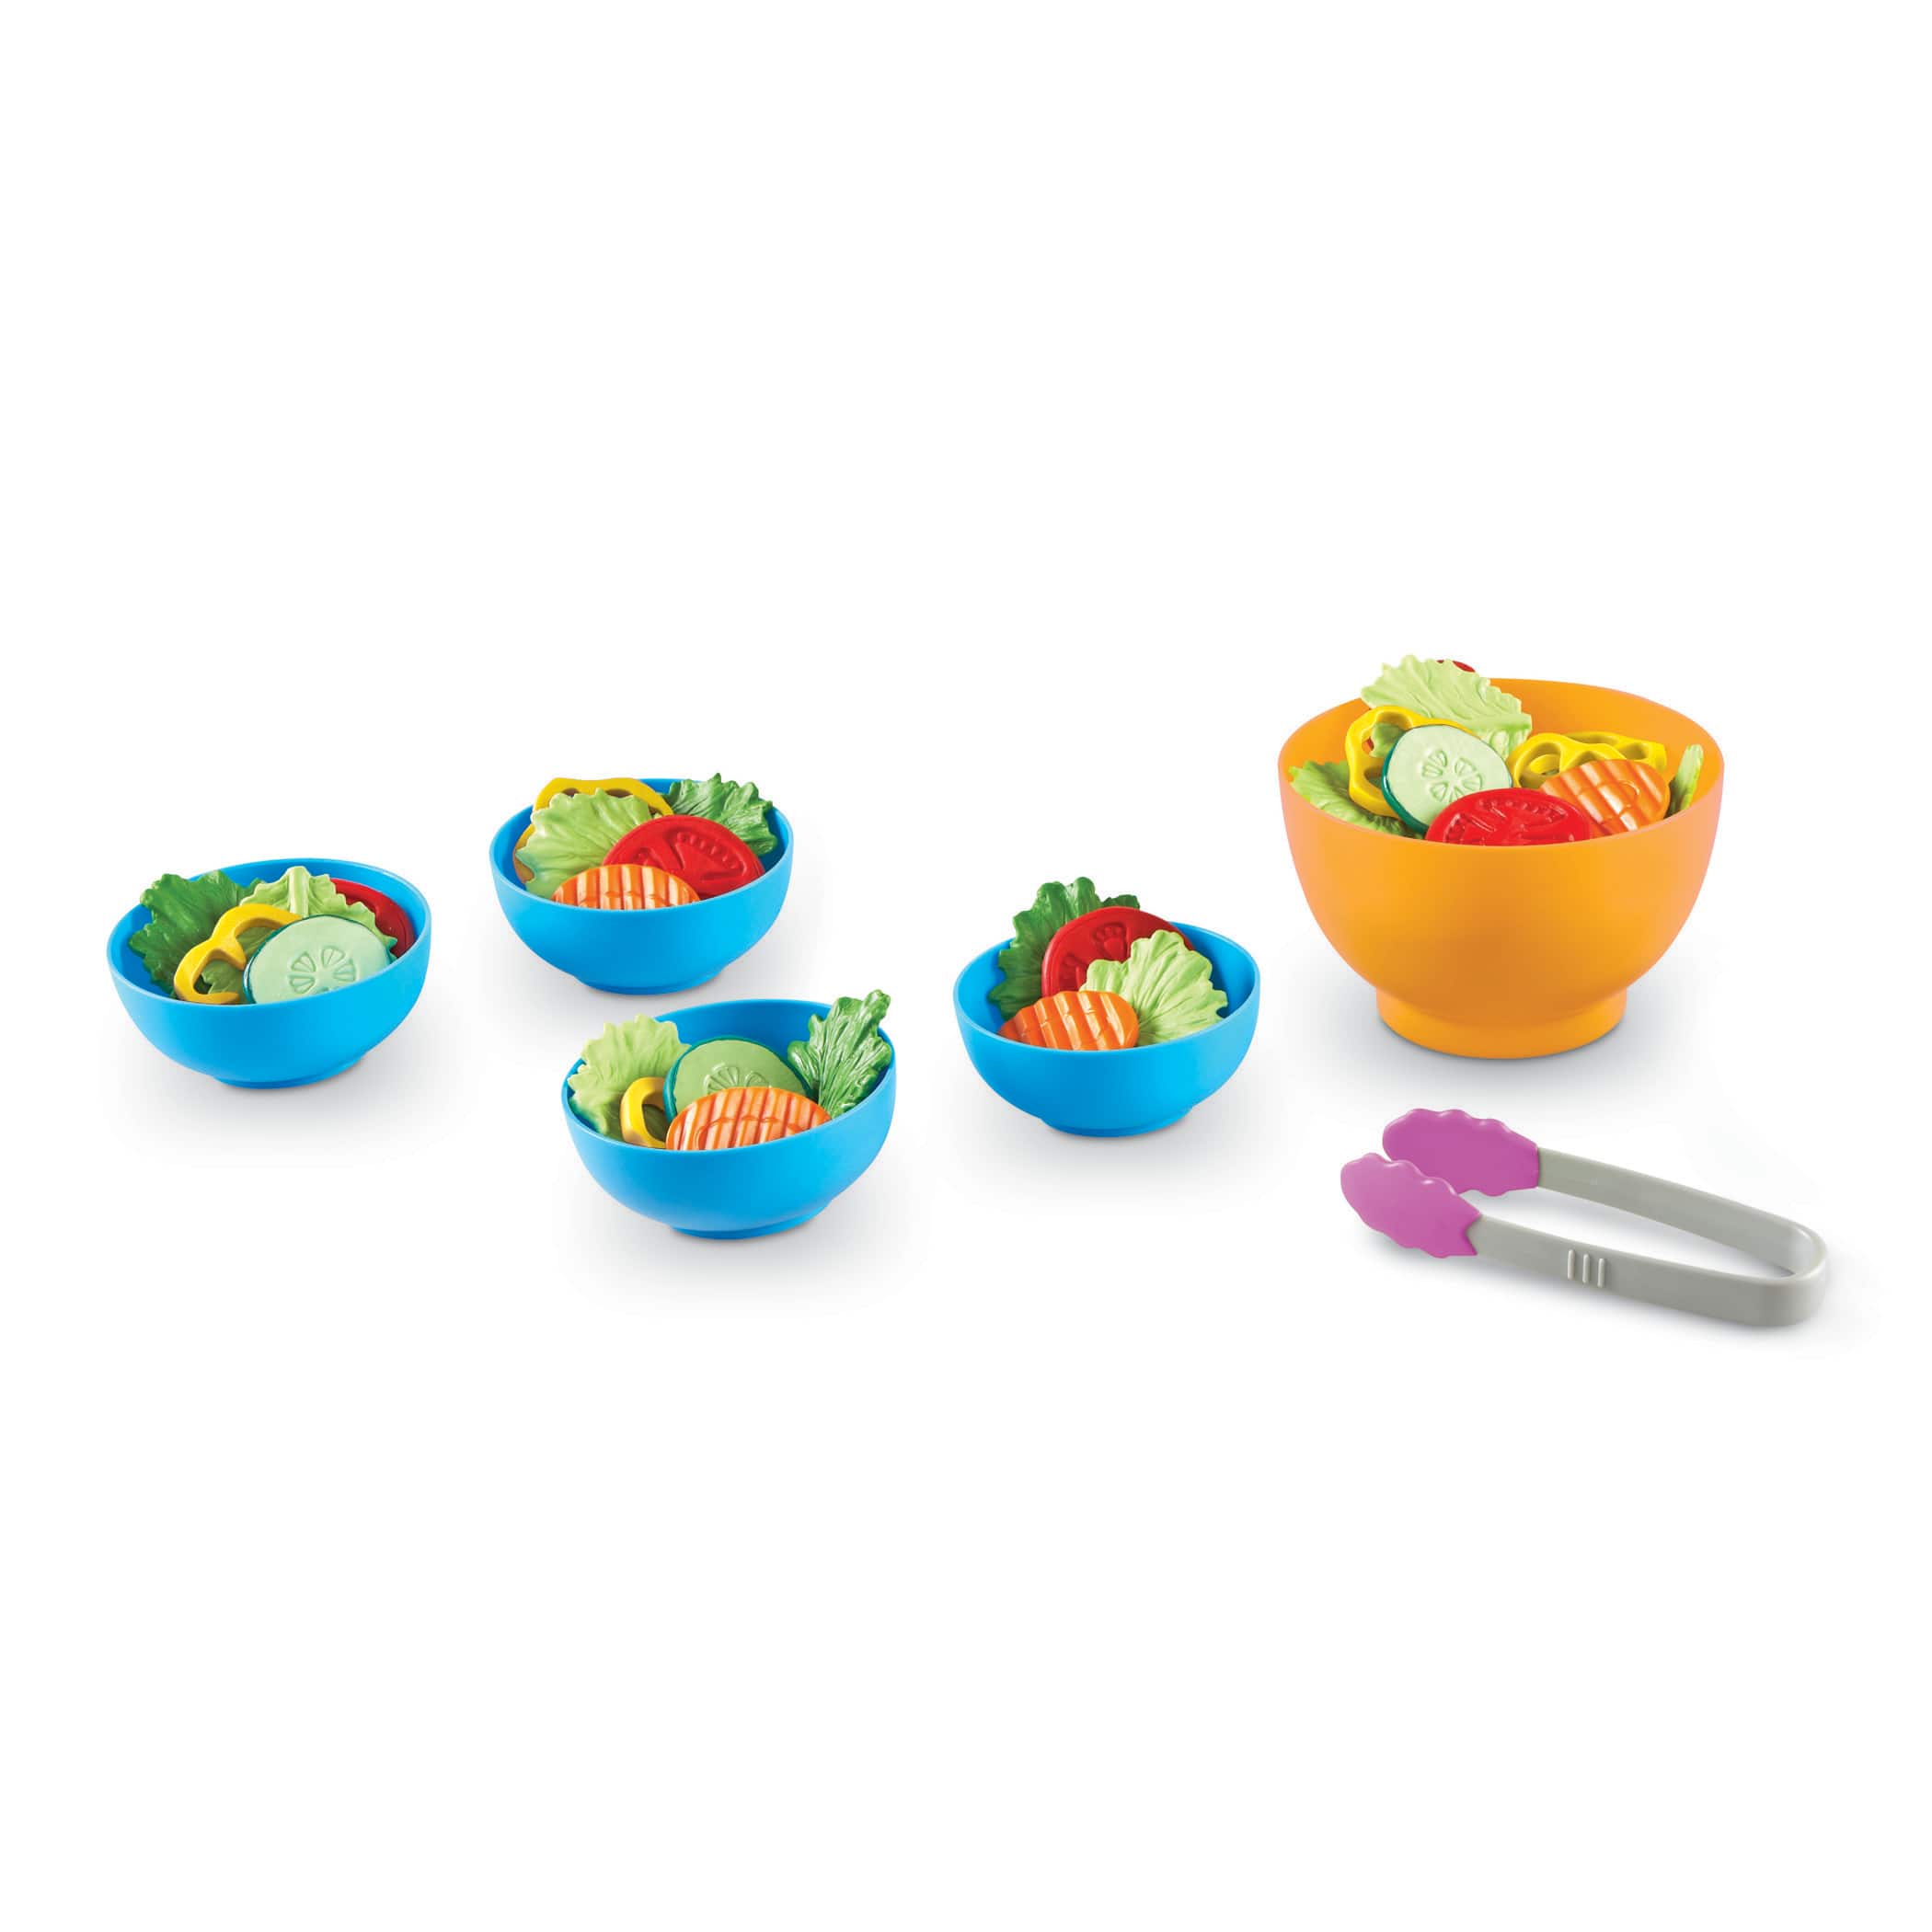 LEARNING RESOURCES SPROUTS ✿ GARDEN FRESH SALAD SET ✿ NEW PLAY